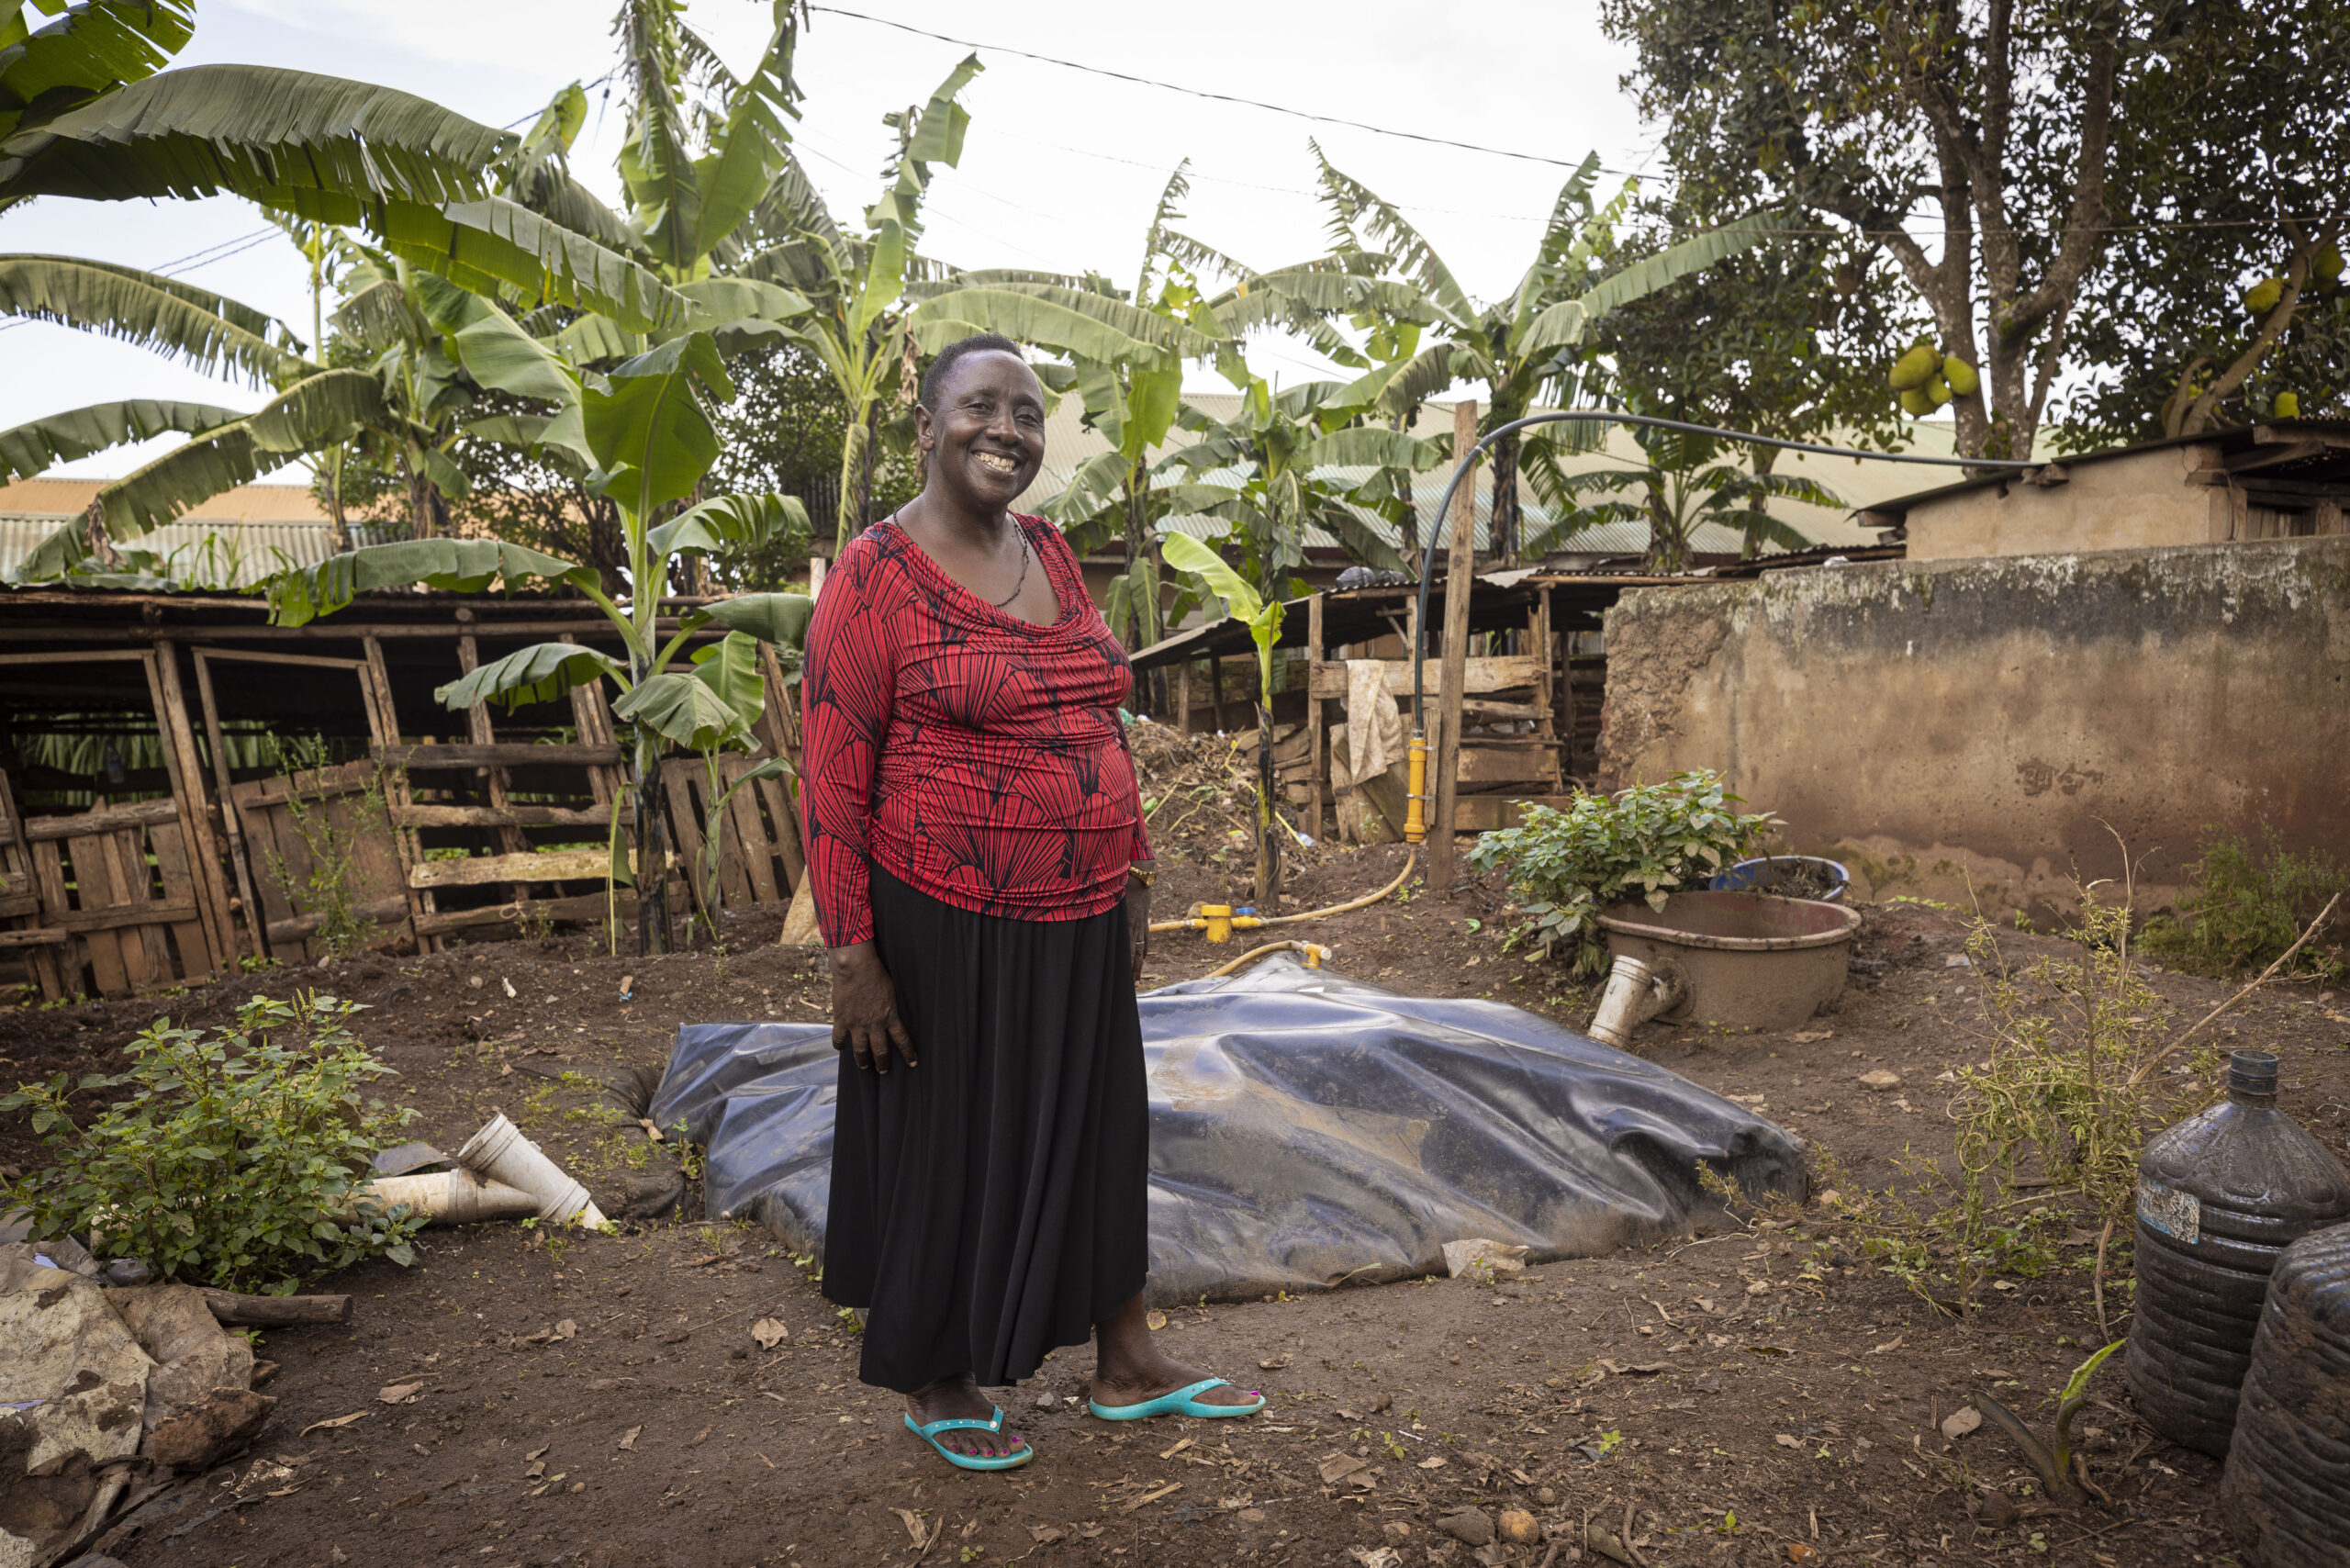 A Ugandan farmer stands near her digester which converts farm waste to fuel and cuts ghg emissions